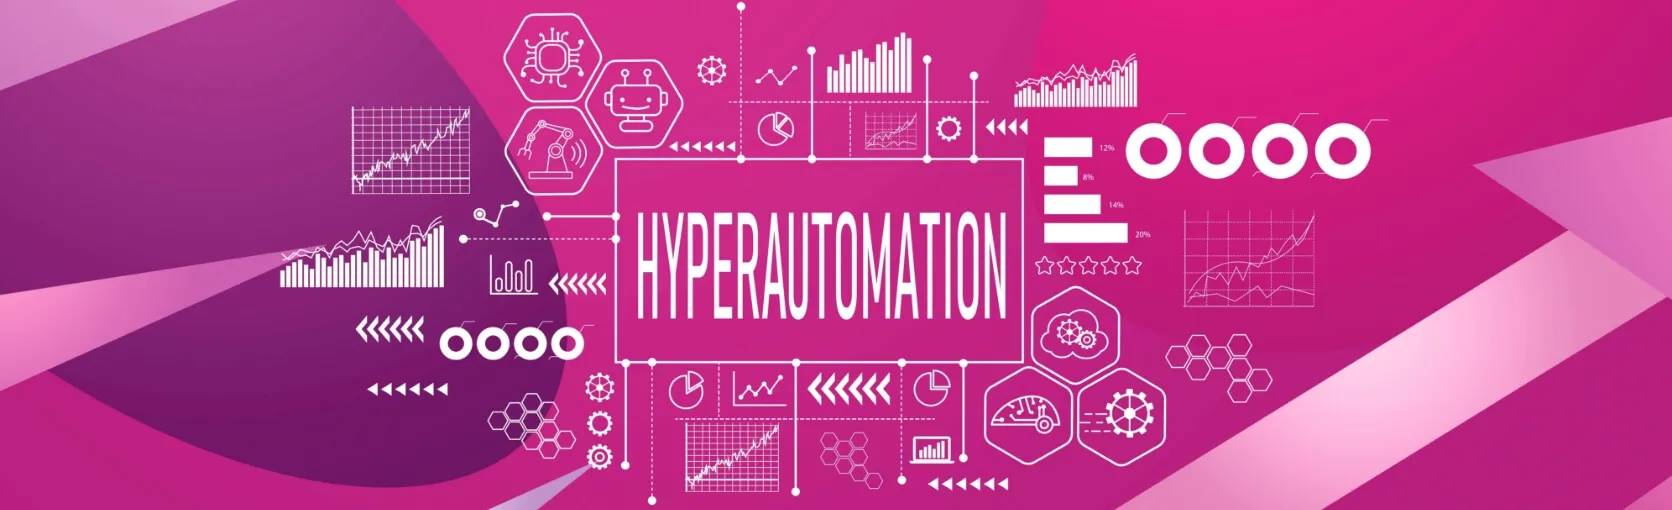 Hyperautomation is the No. 1 Trend for the Roaring Twenties: Gartner’s Top Ten Strategic Technology Trends 2020